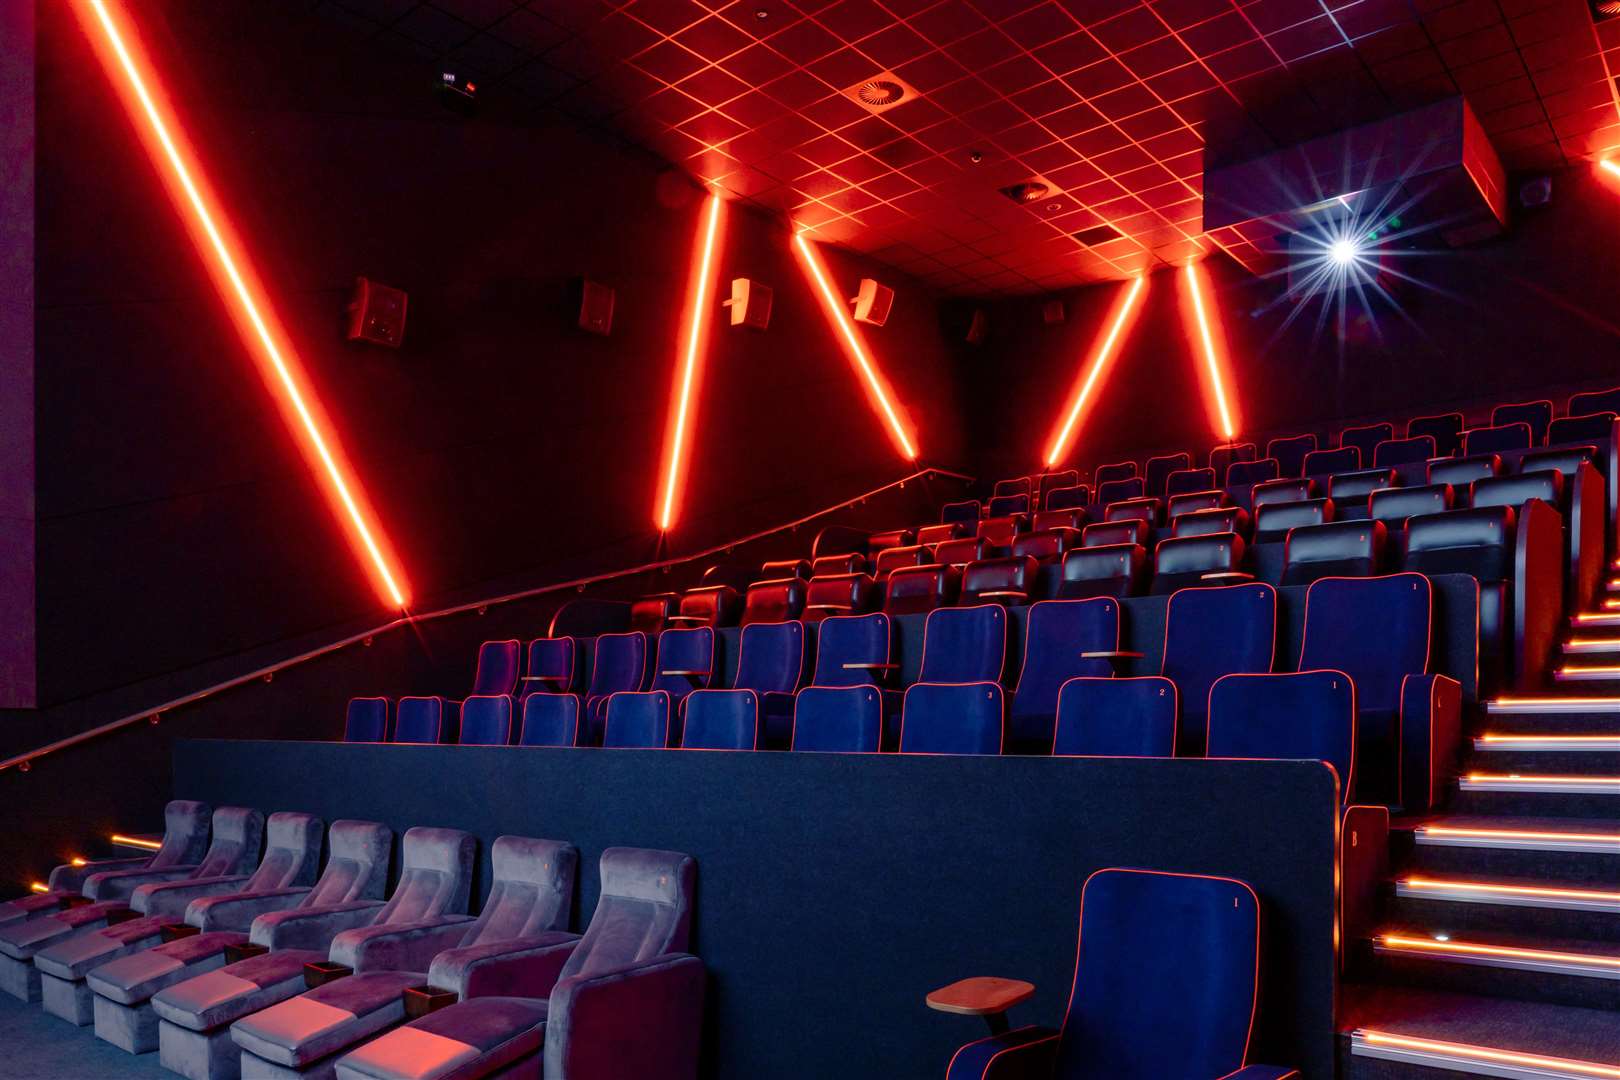 There are a range of seating options at The Light's state-of-the-art cinema